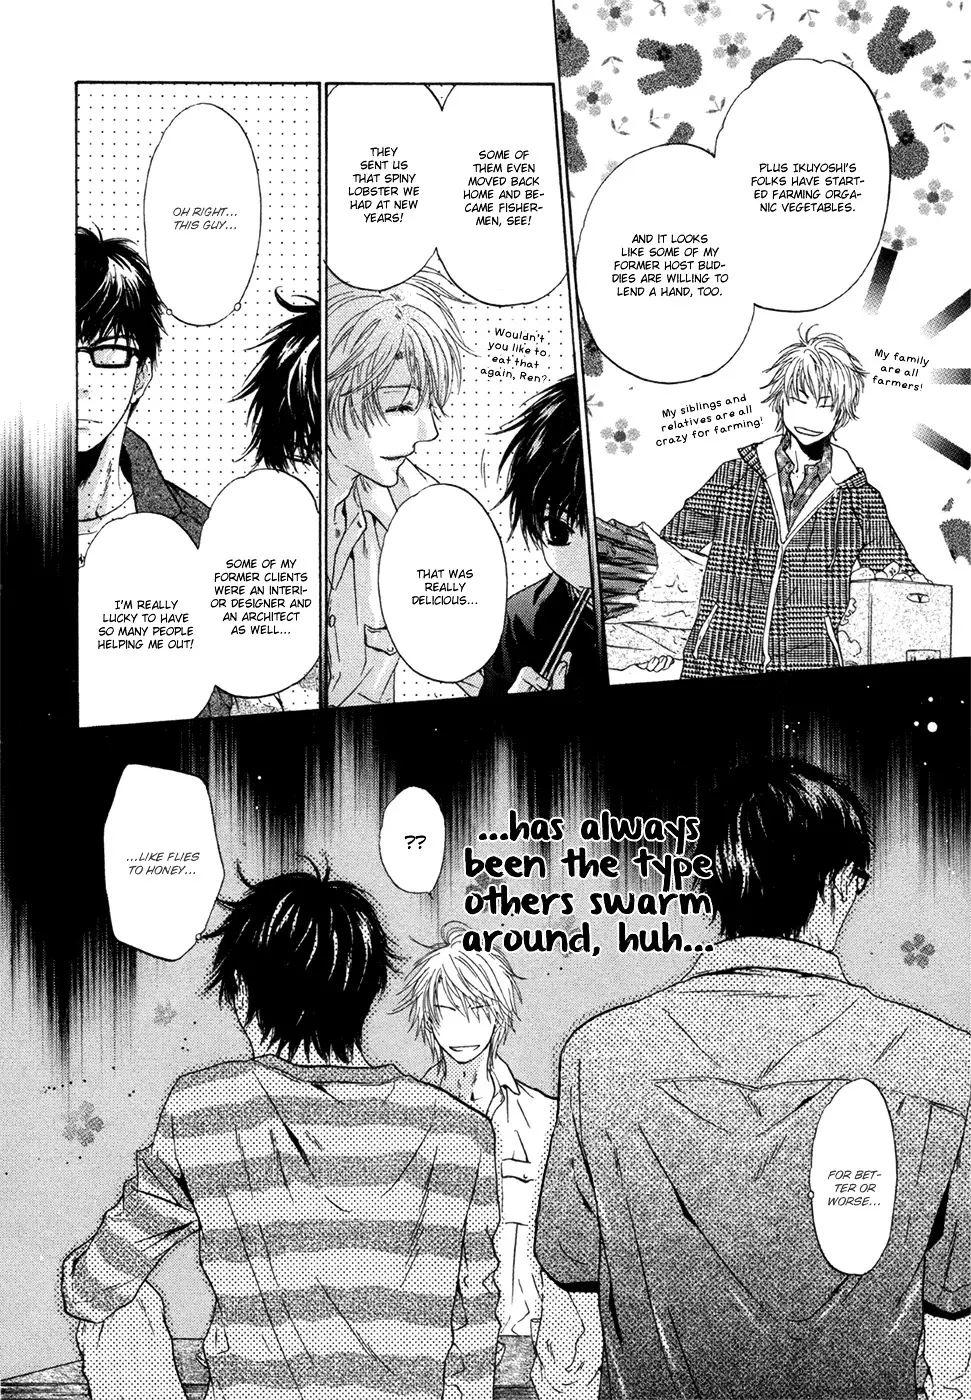 Super Lovers - 5 page 6-82aba28c